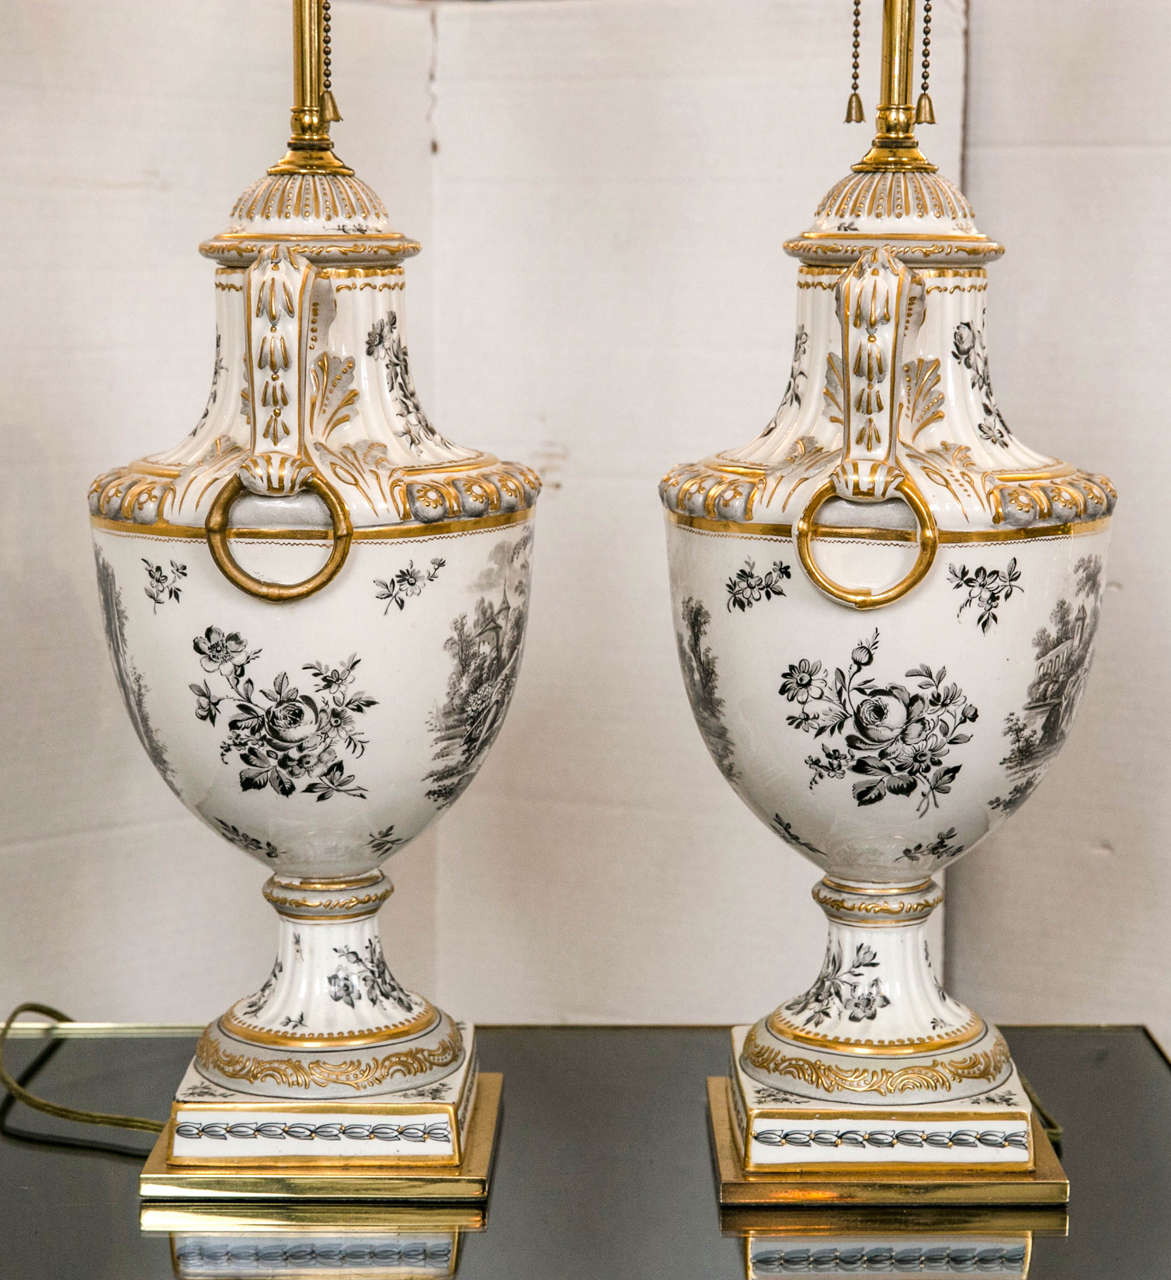 Brass Pair of 19th Century French Porcelain Urns as Table Lamps